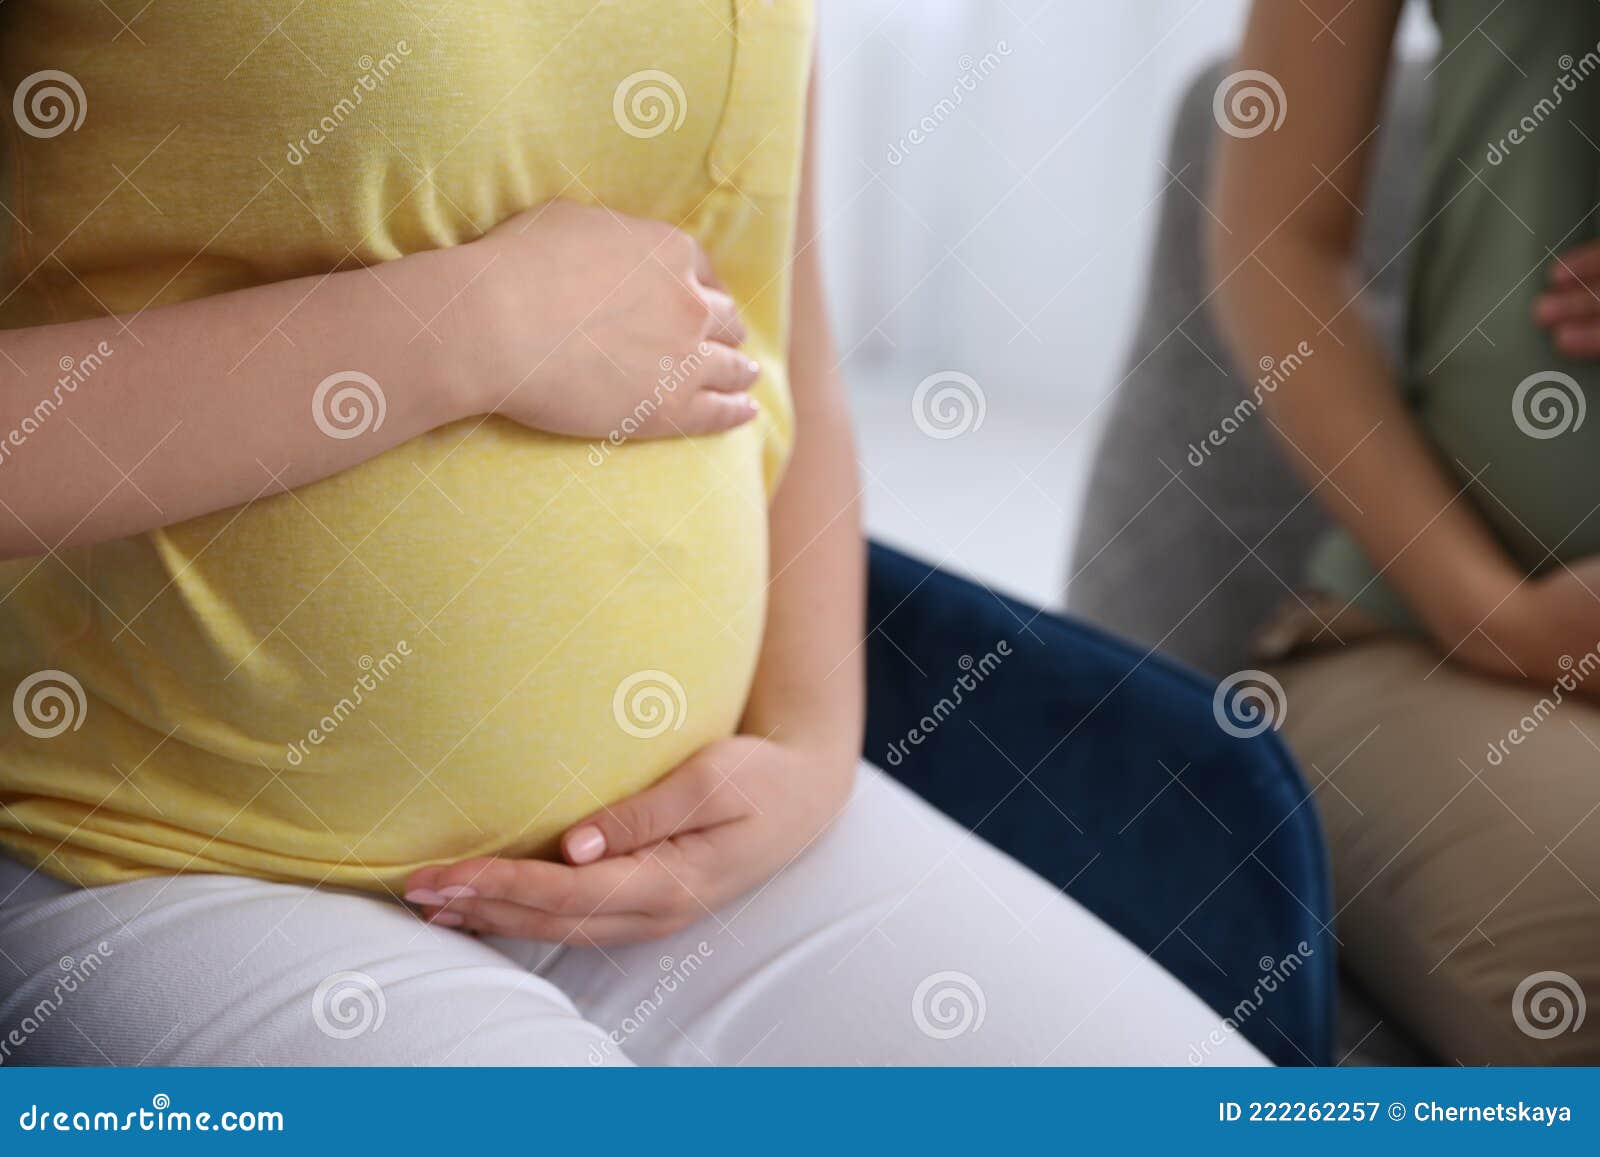 Pregnant Woman Sitting On Chair Indoors Courses For Expectant Mothers Stock Image Image Of